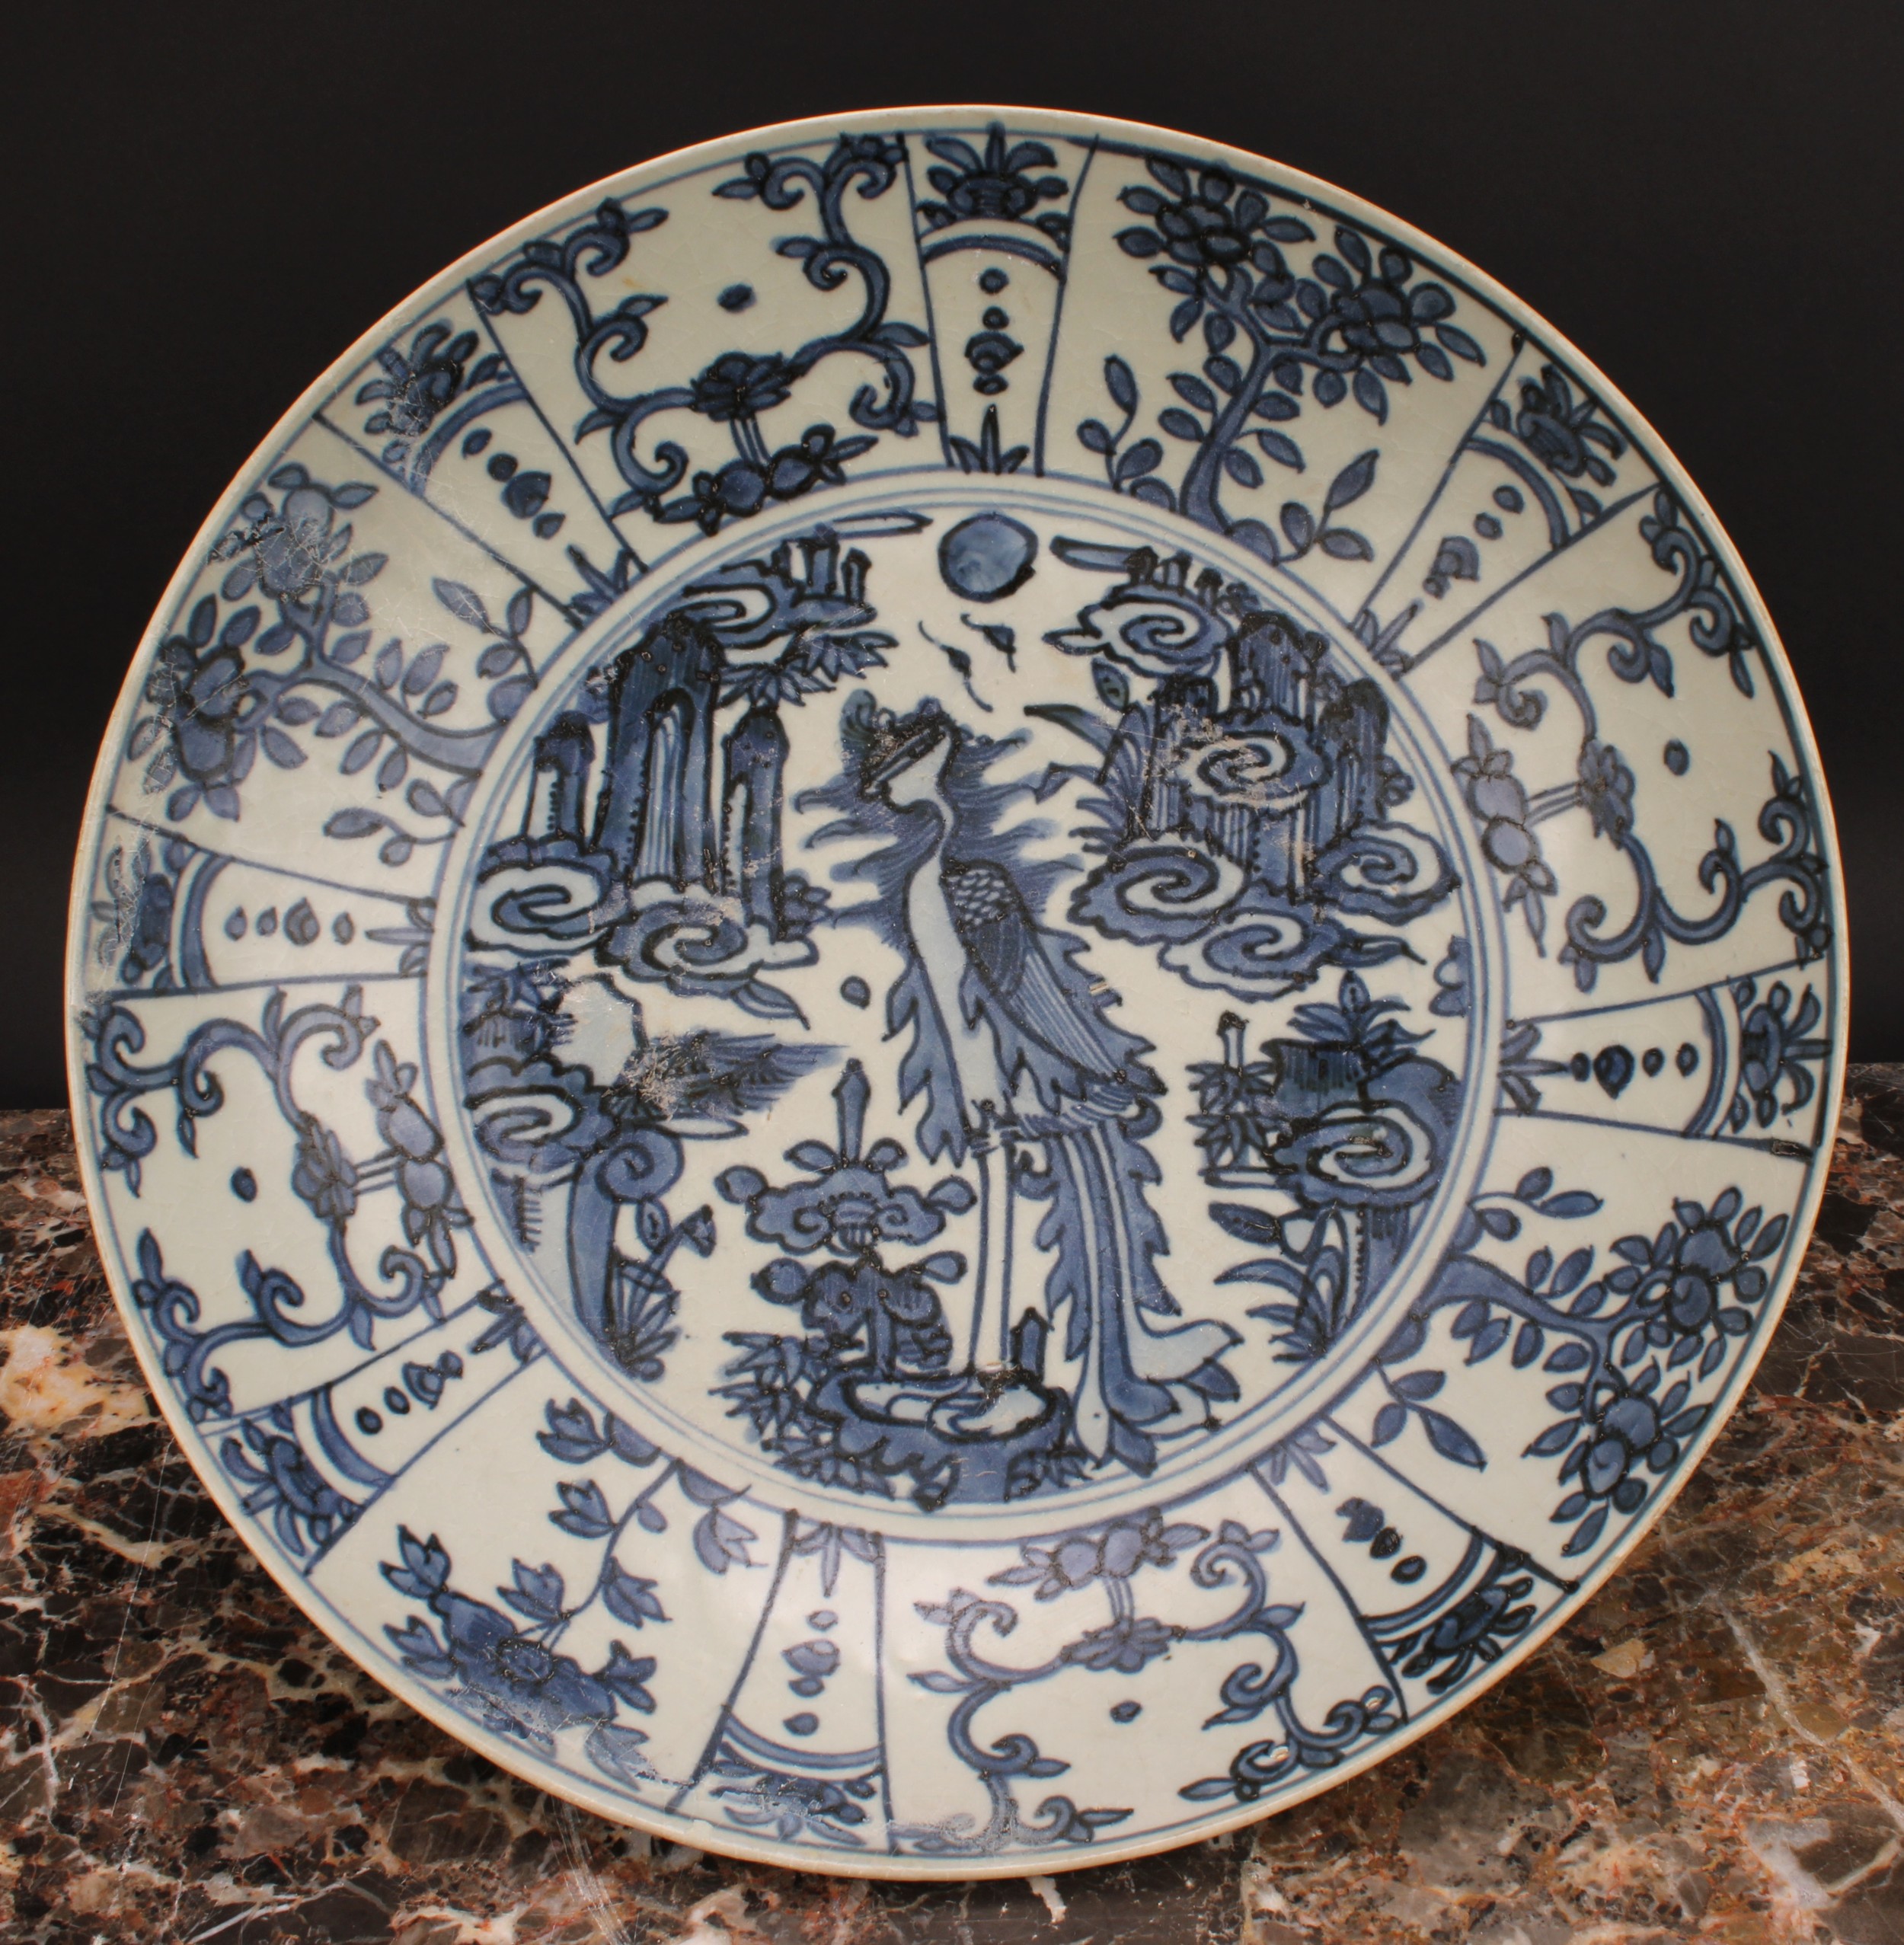 A pair of 17th century Chinese shipwreck porcelain dishes, painted in tones of underglaze blue - Image 4 of 5